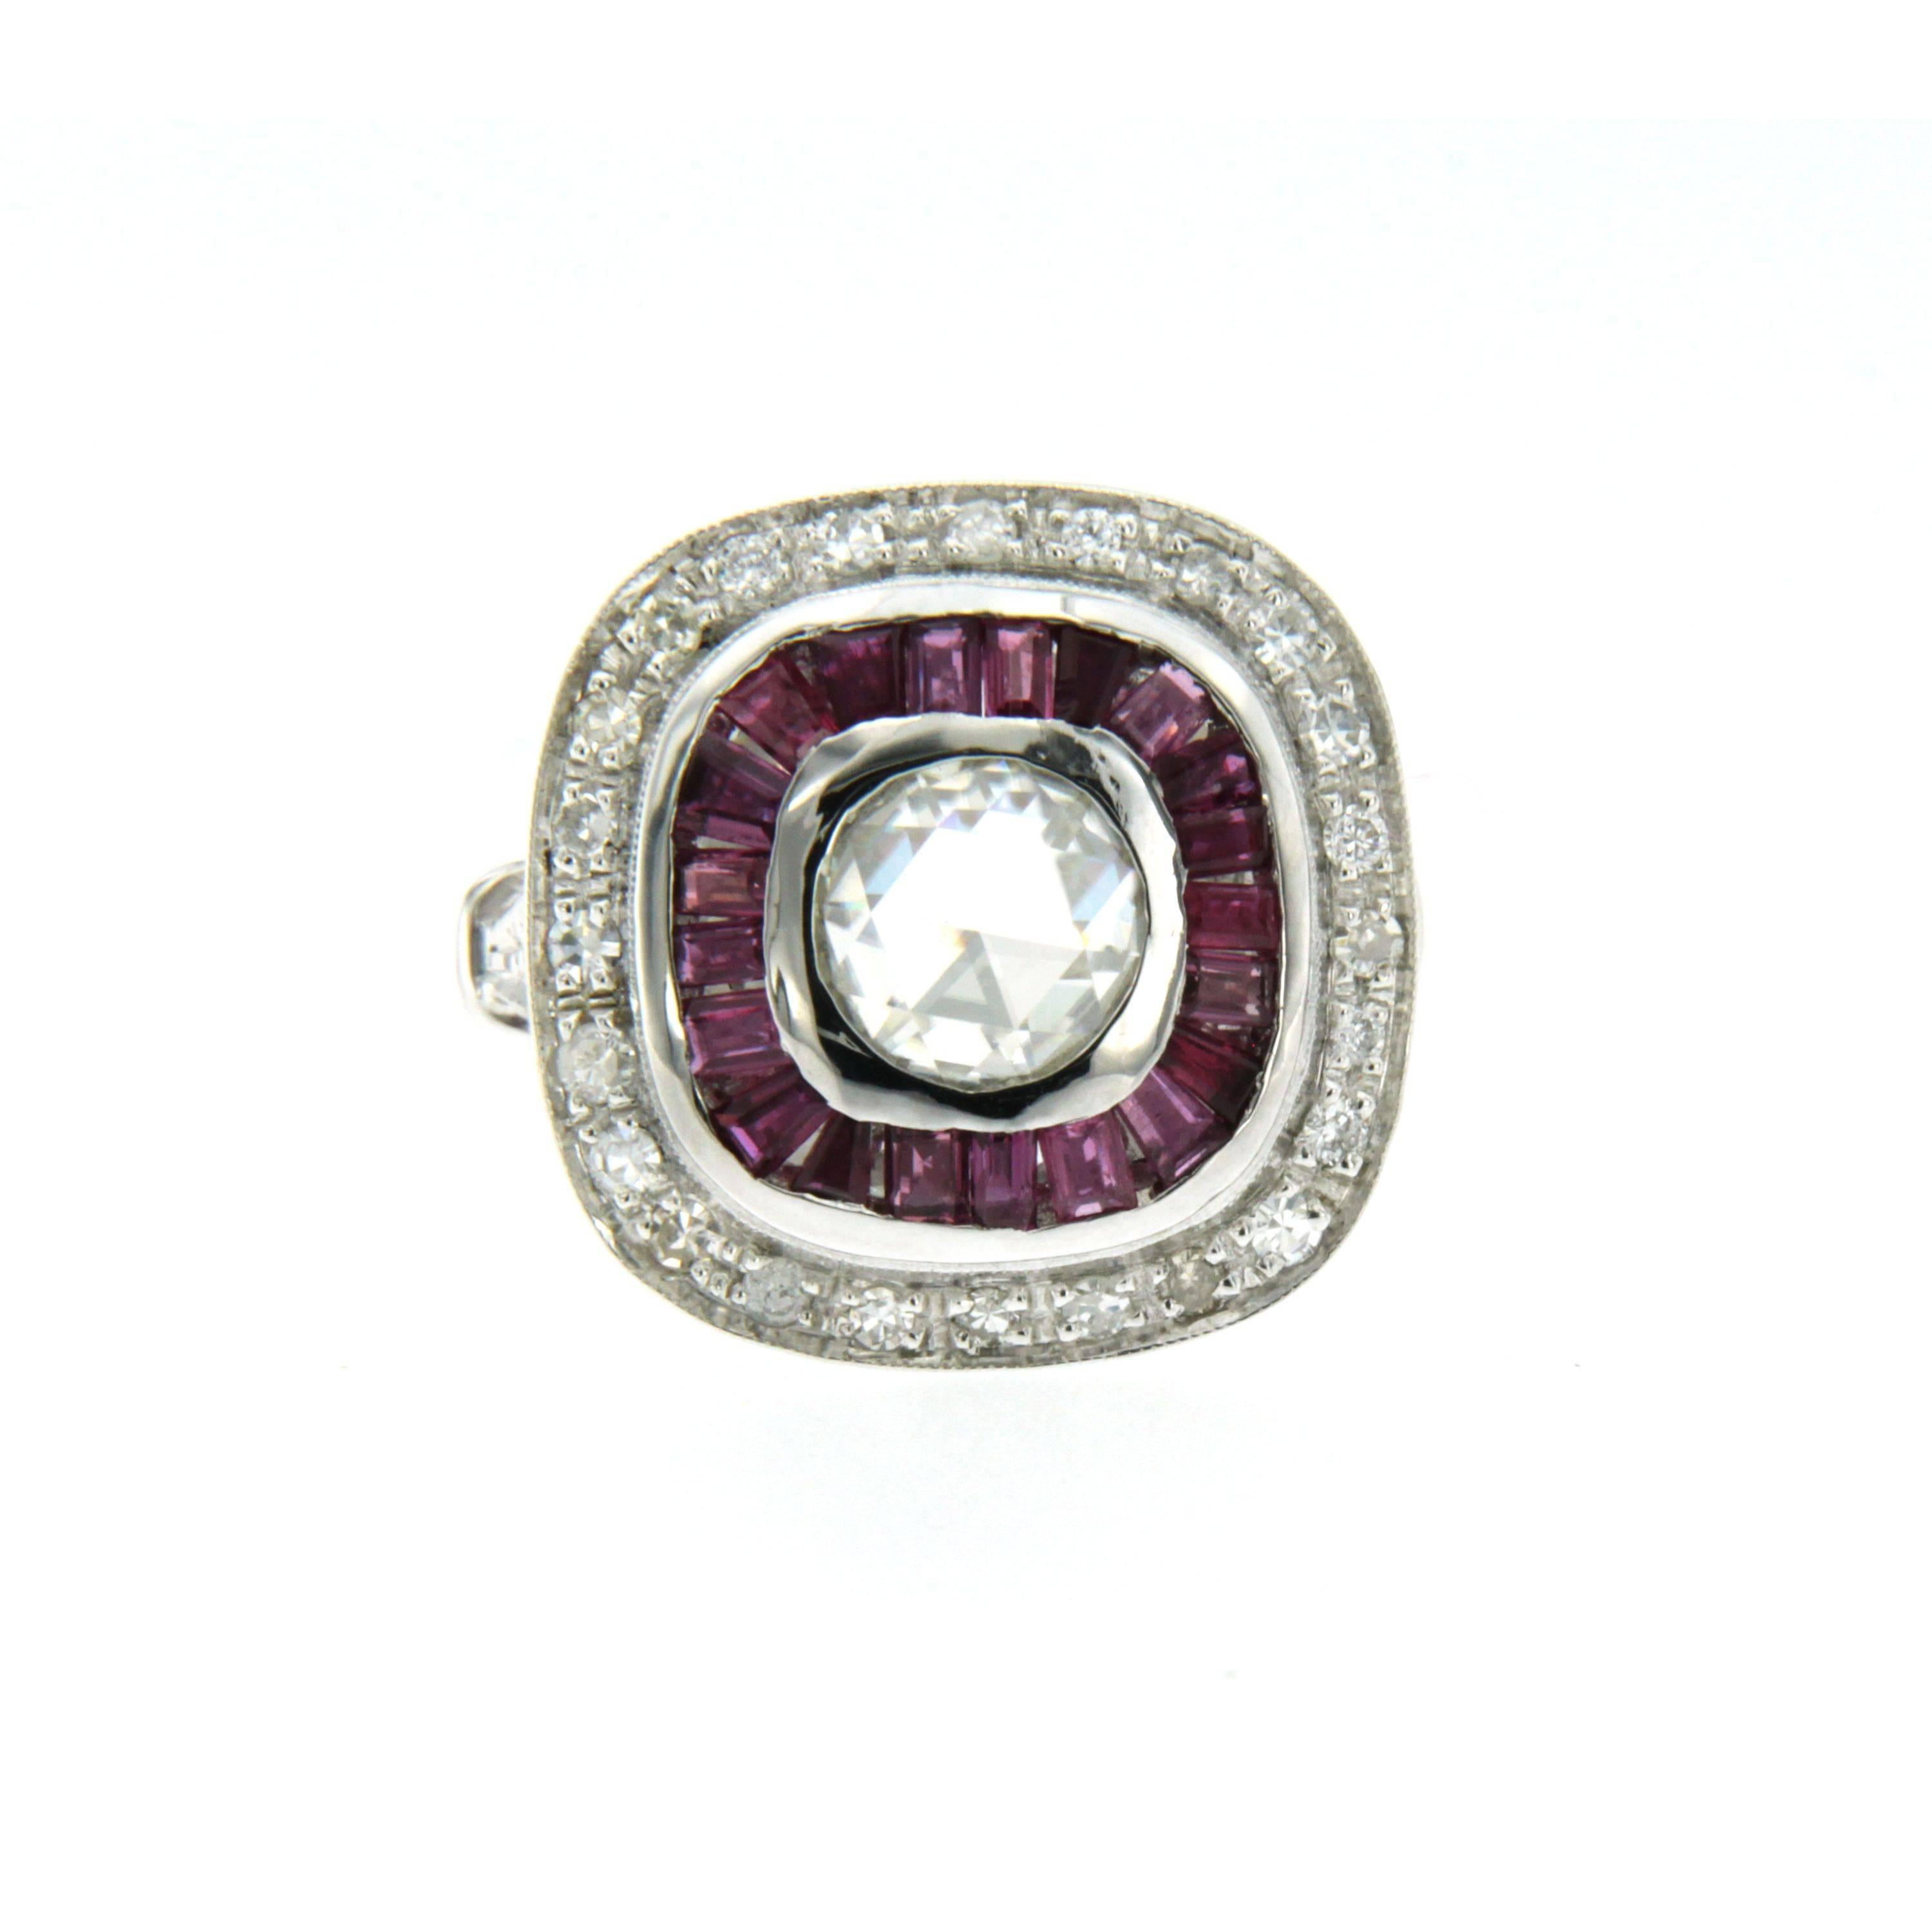 Hand crafted in 18k gold Art Deco inspired ring features a sparkling and large .86 Old Mine cut diamond that is K color and SI2 clarity. The diamond is surrounded by a double halo of 1.50 carats well matched sparkling rubies and .70 carats of